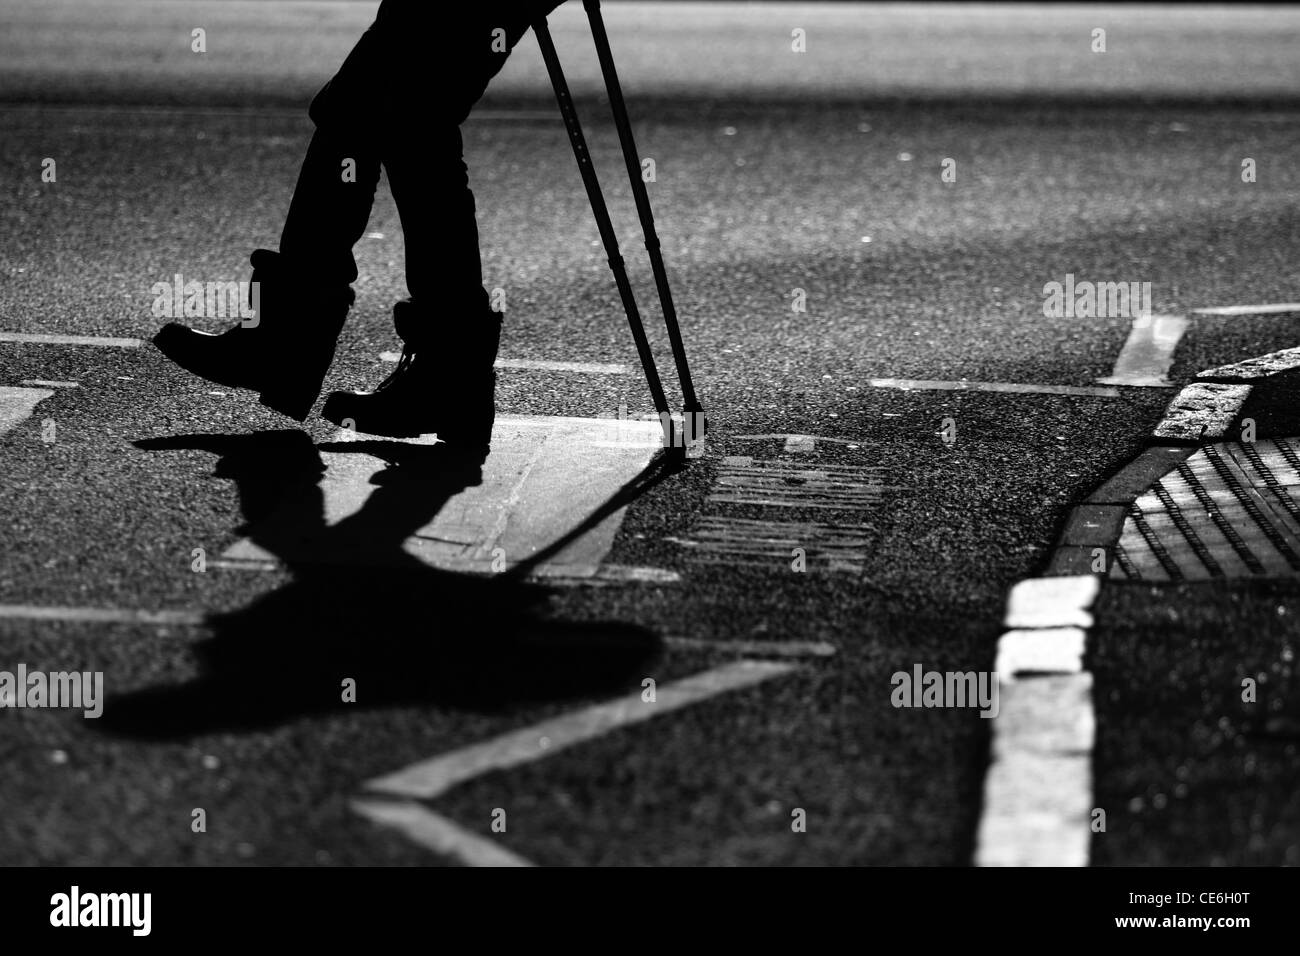 The legs of a man on crutches as he crosses a road at a zebra crossing Stock Photo